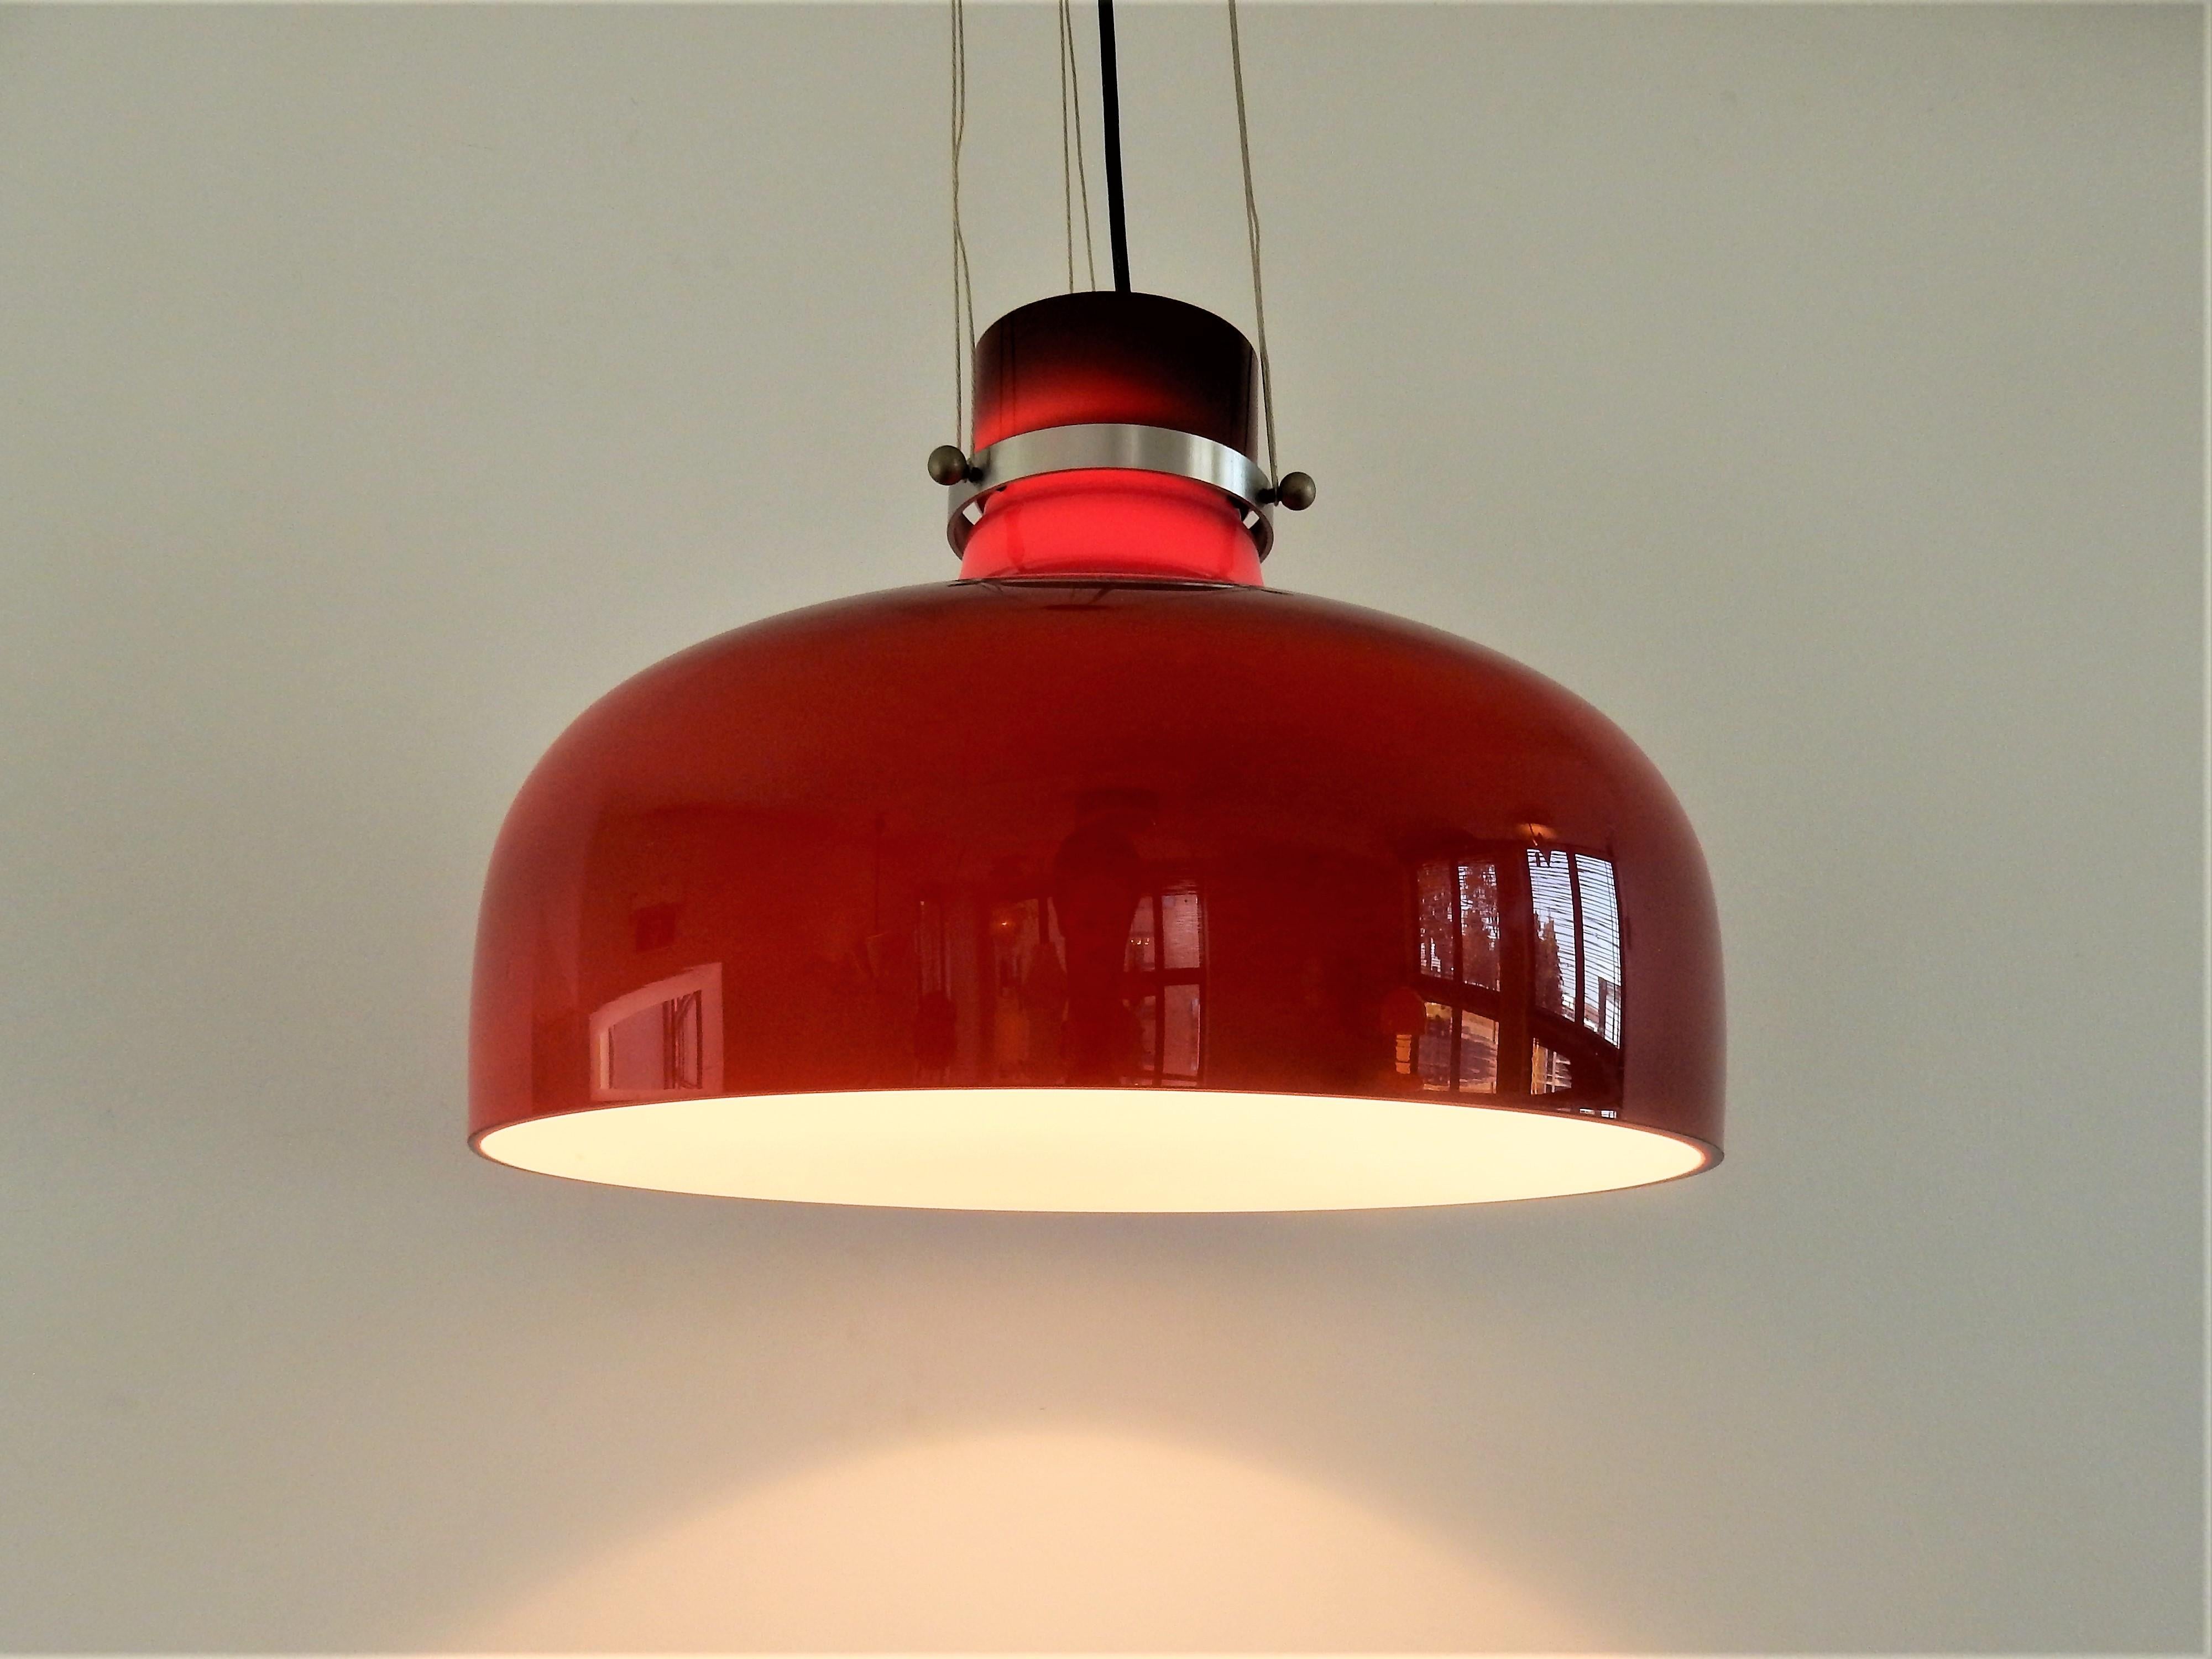 This large and very nice pendant lamp is made of red brown colored glass with a white inside. The glass is hung to the fixture by a metal ring with 3 connecting screws. This model is documented in the catalogue of Indoor, but than as a smaller size.